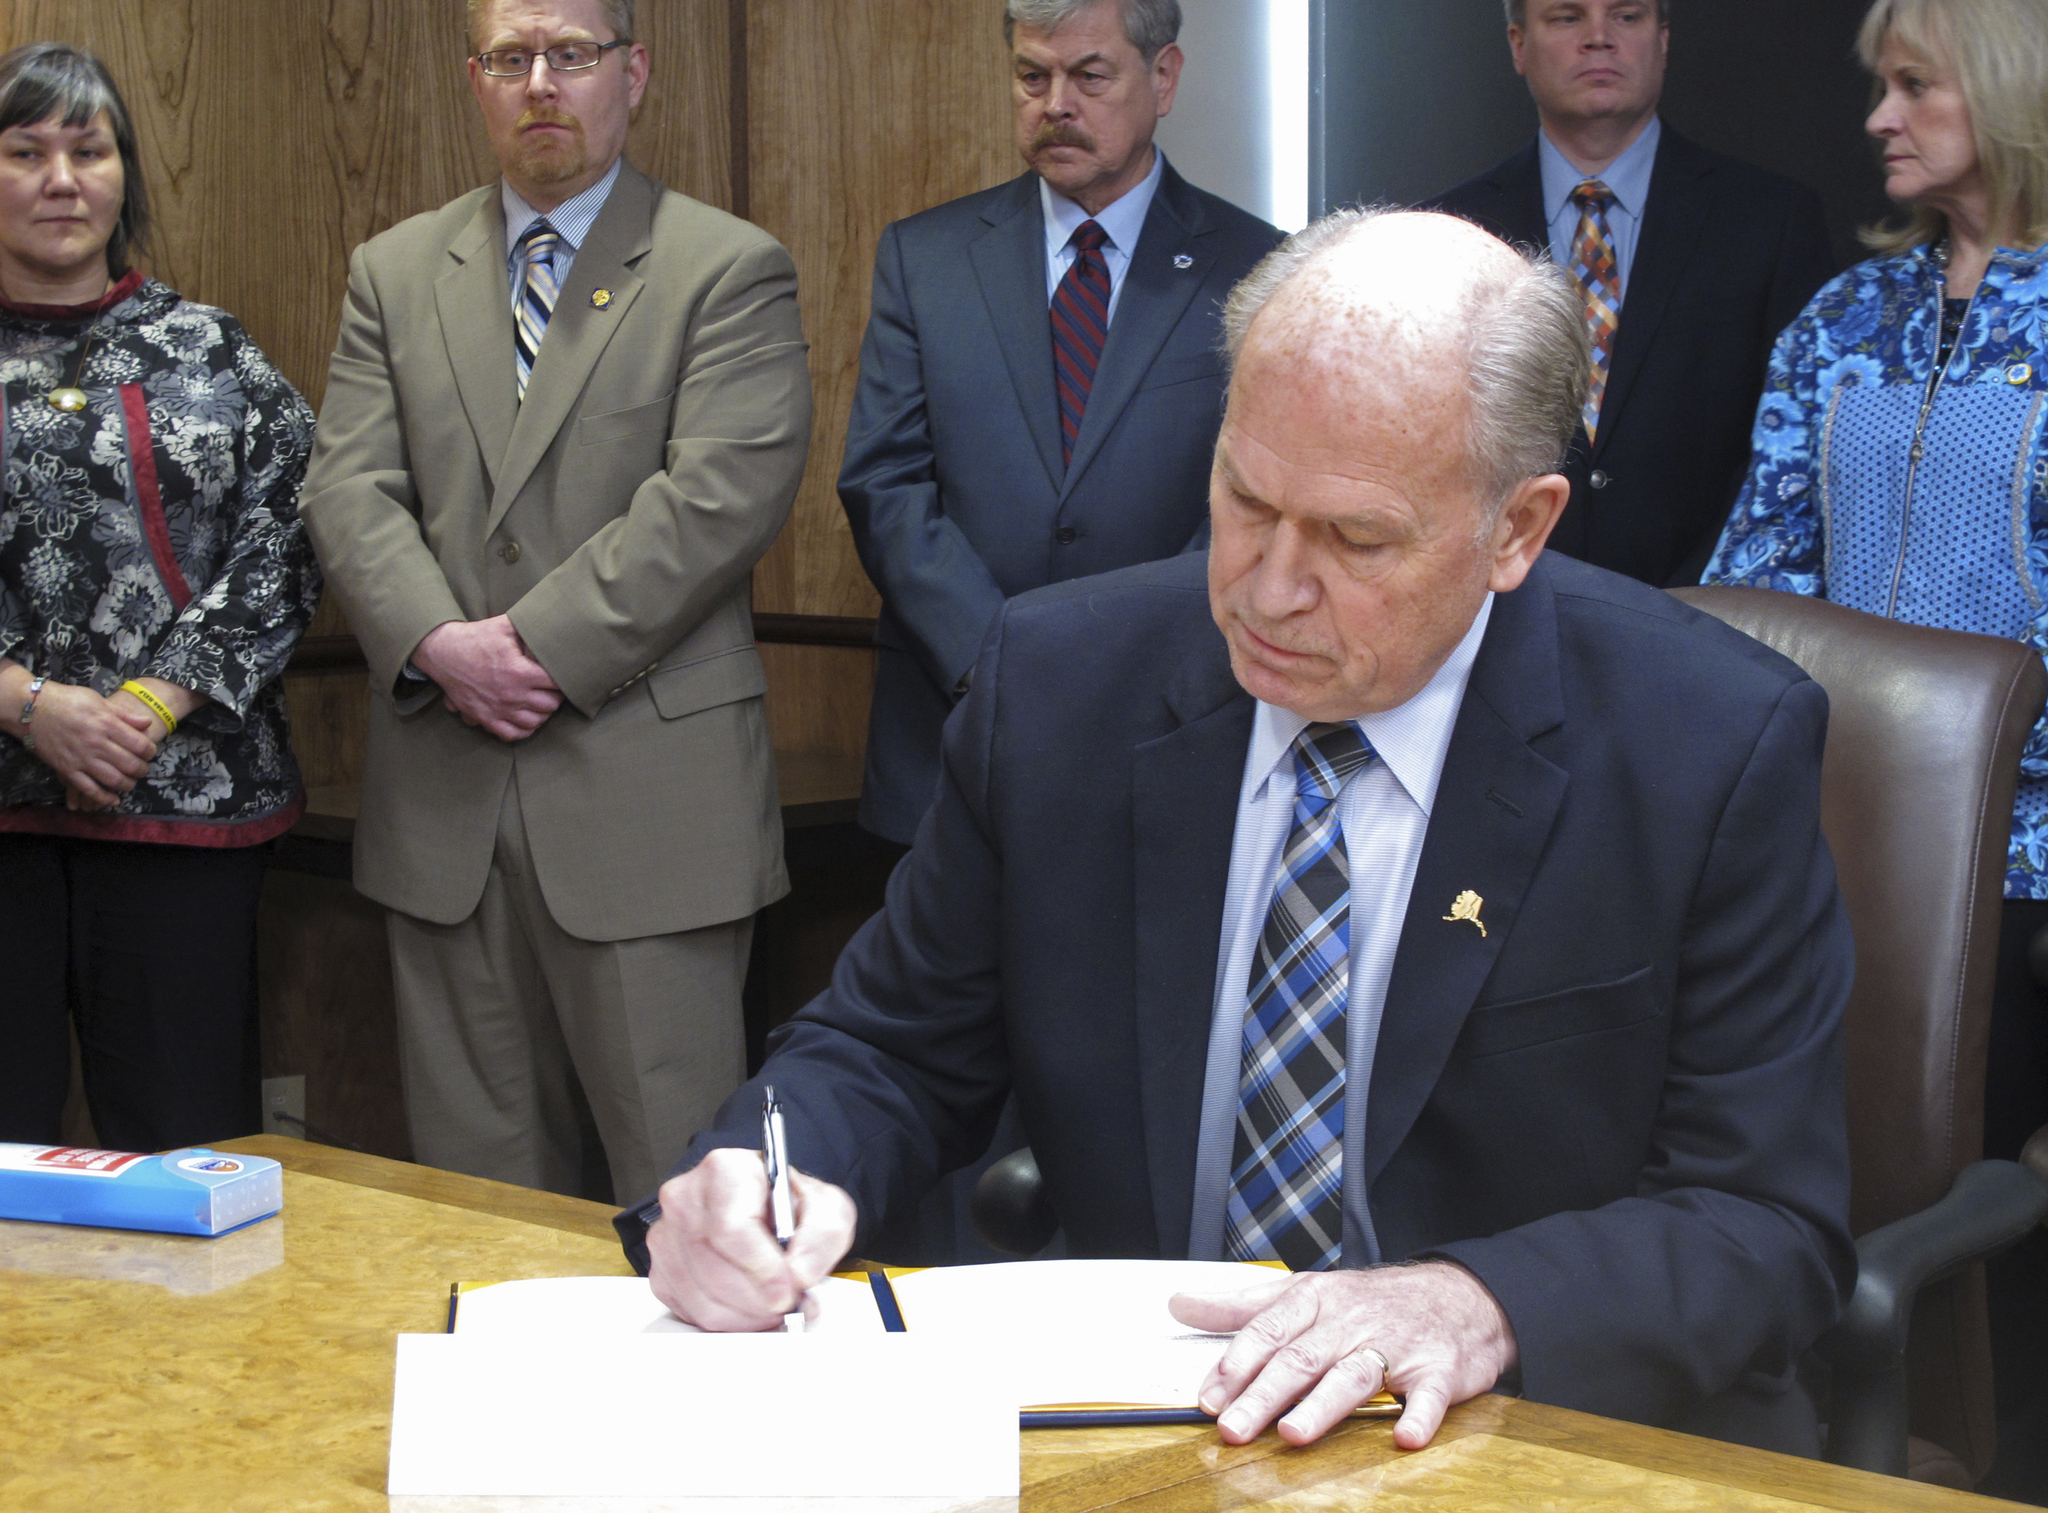 Governor signs order with plans to fight opioid abuse